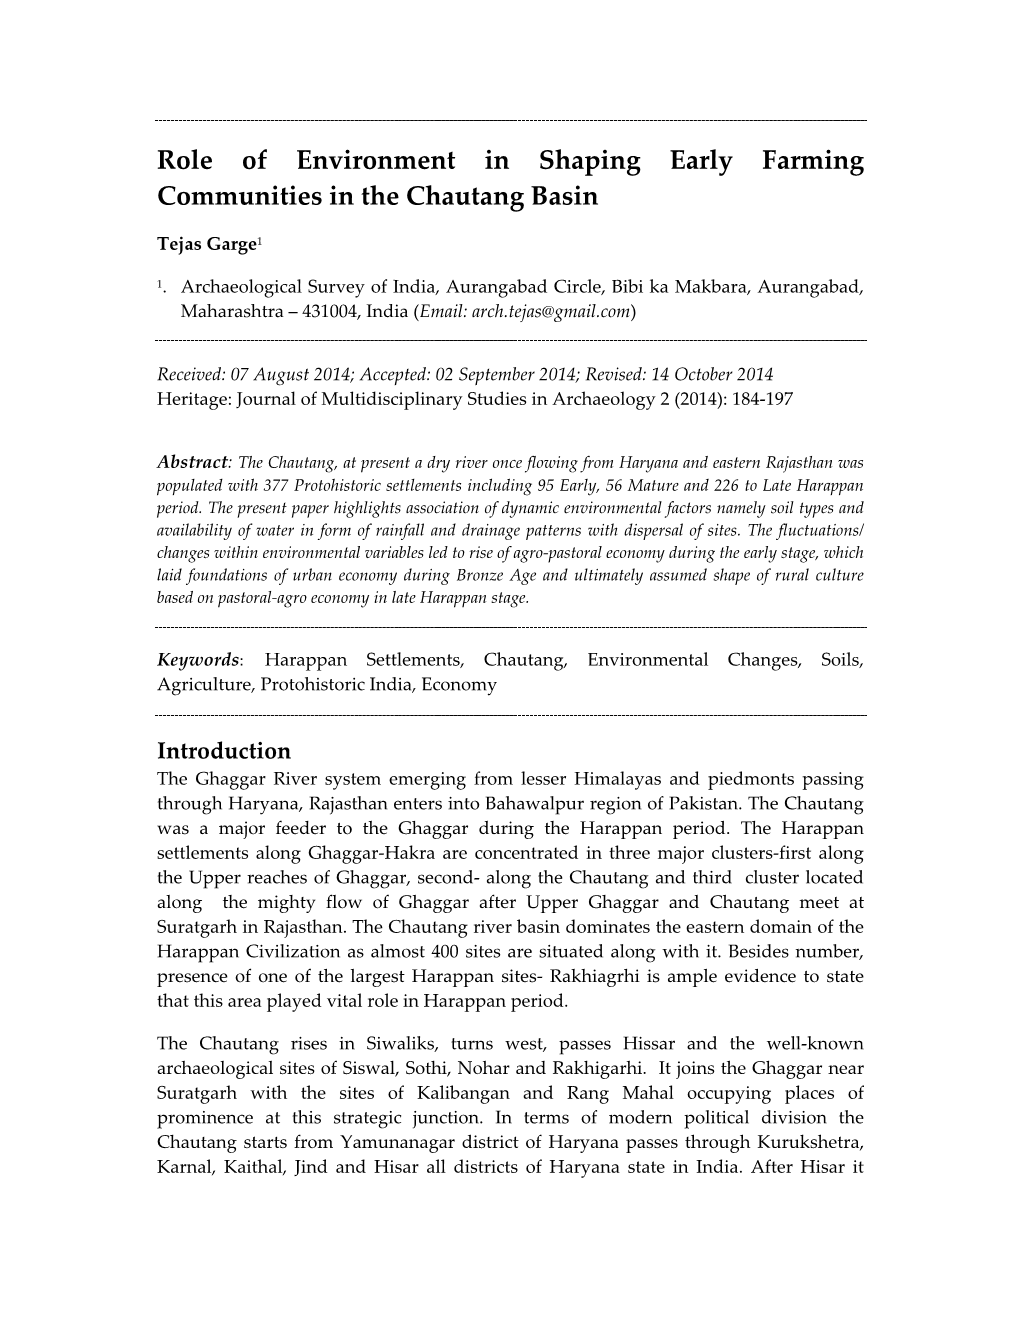 Role of Environment in Shaping Early Farming Communities in the Chautang Basin